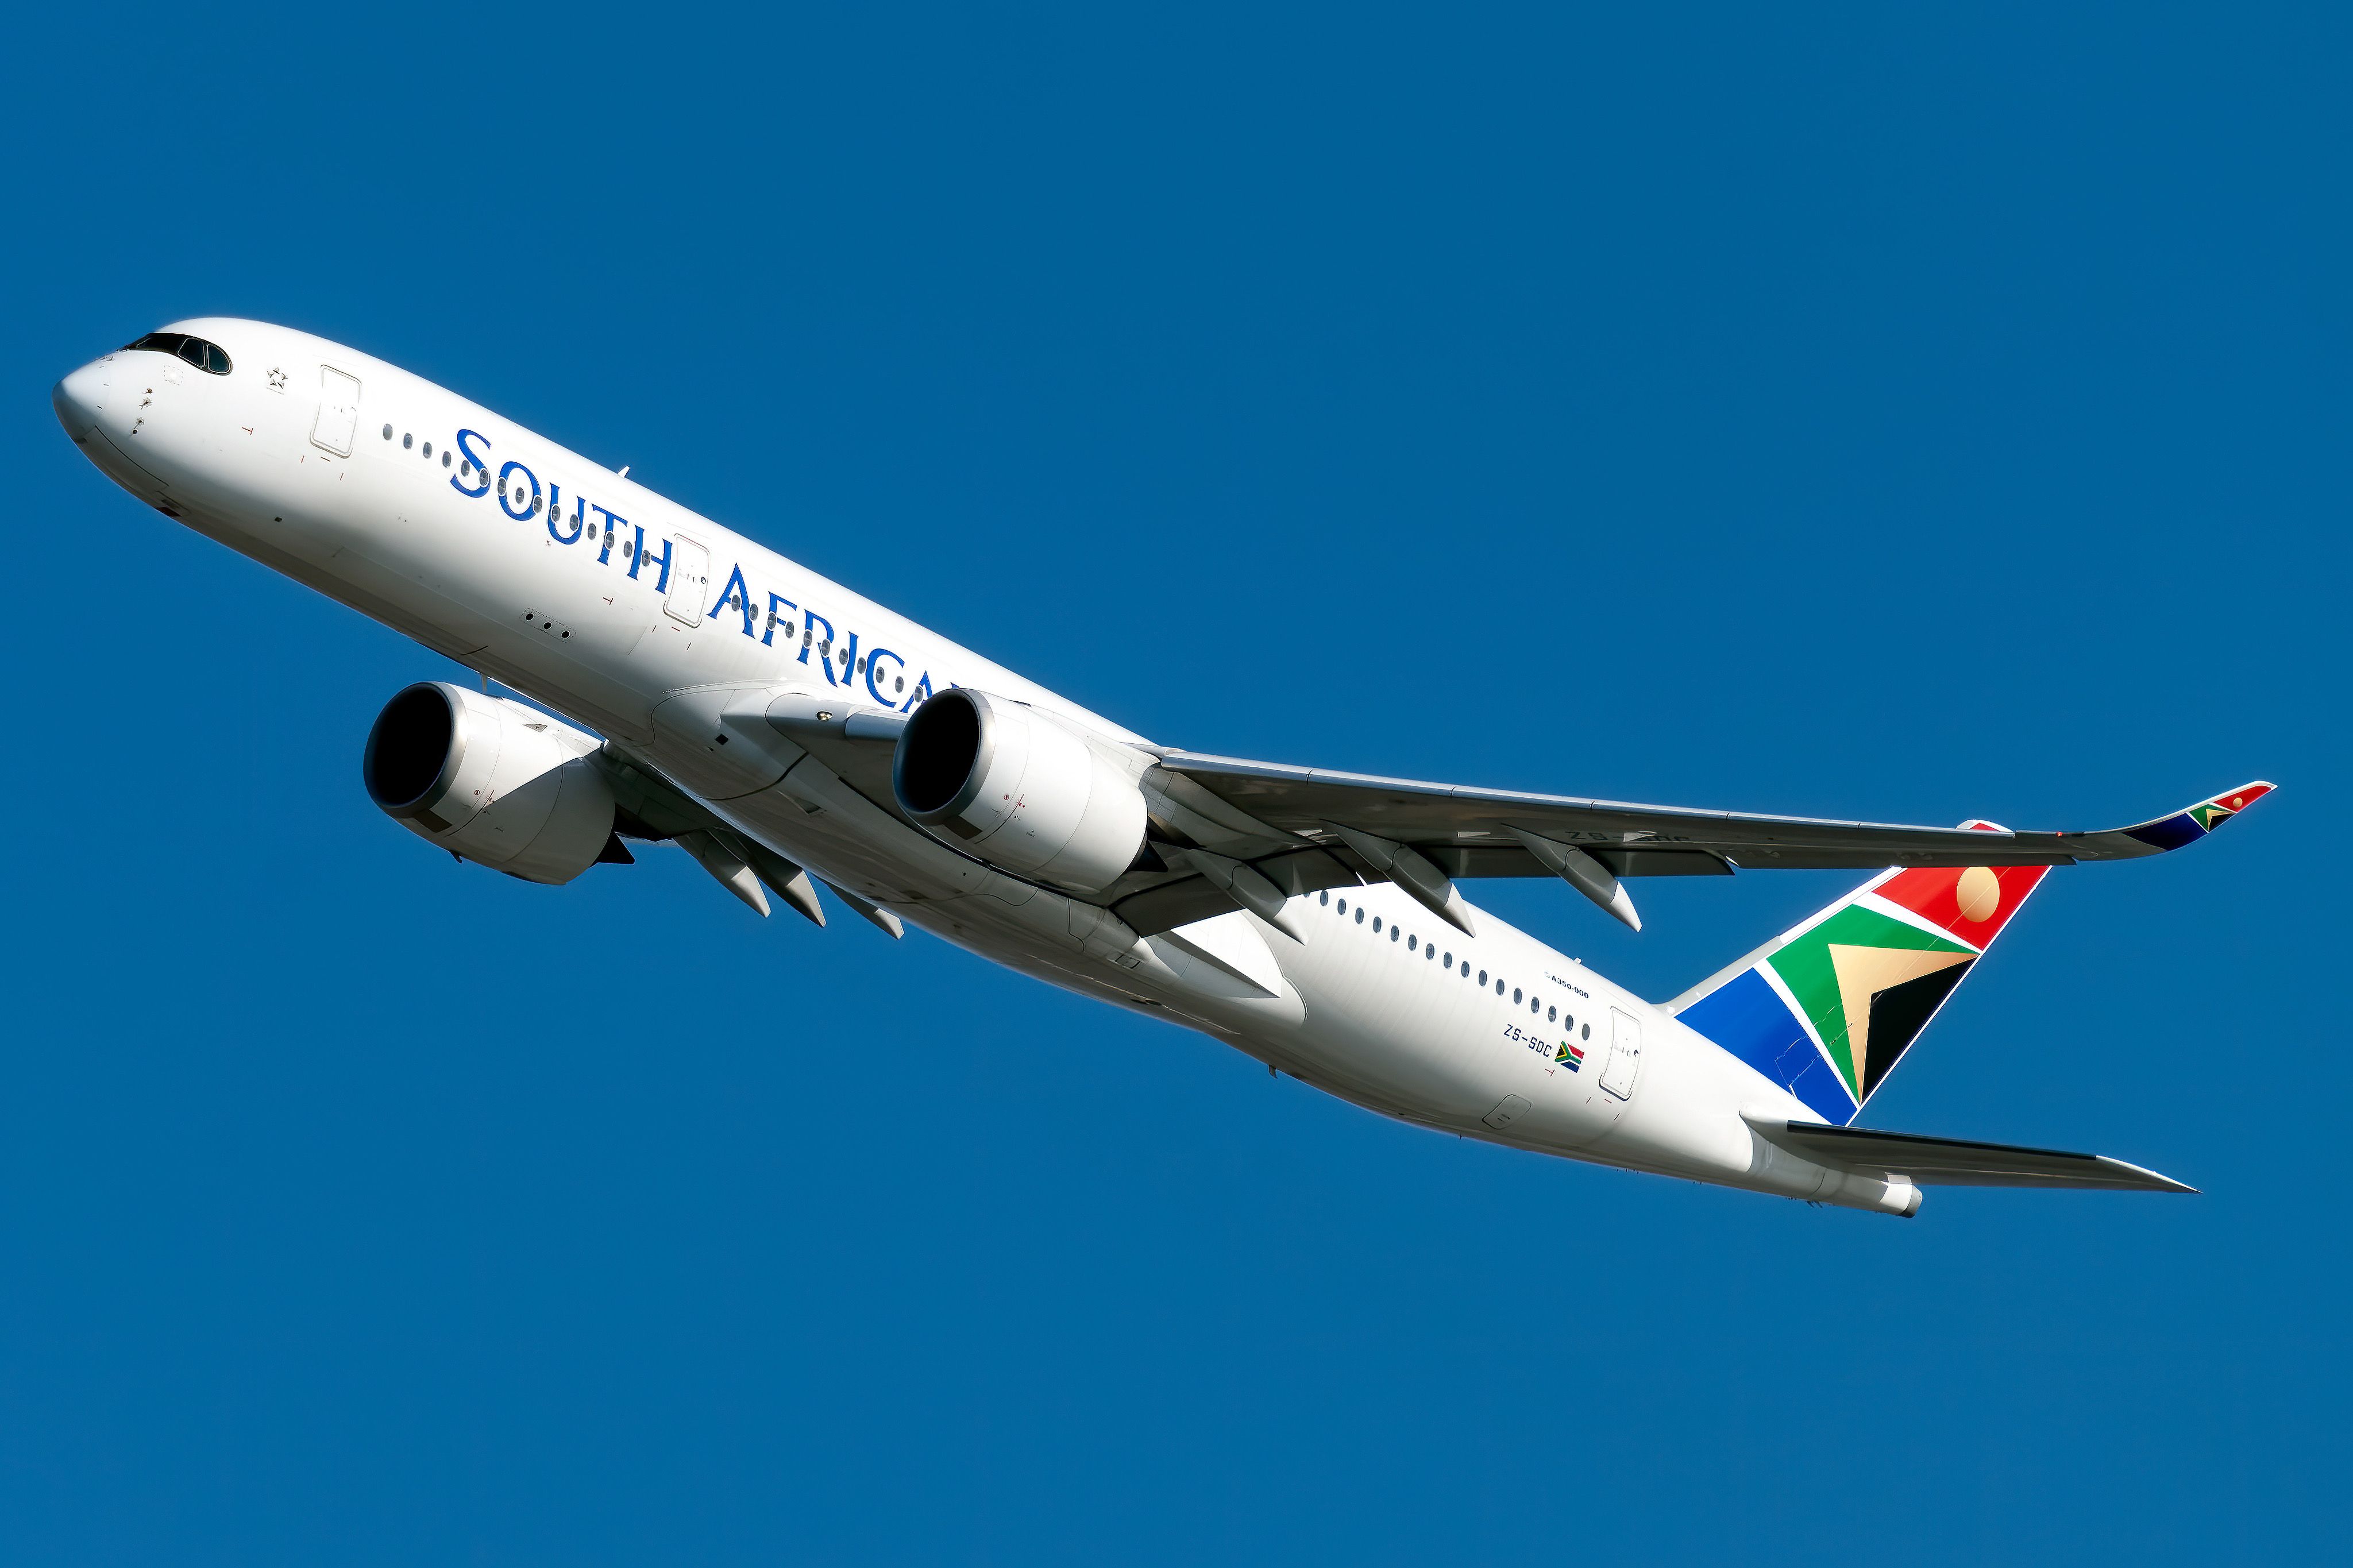 South African Airways Airbus A350-900 